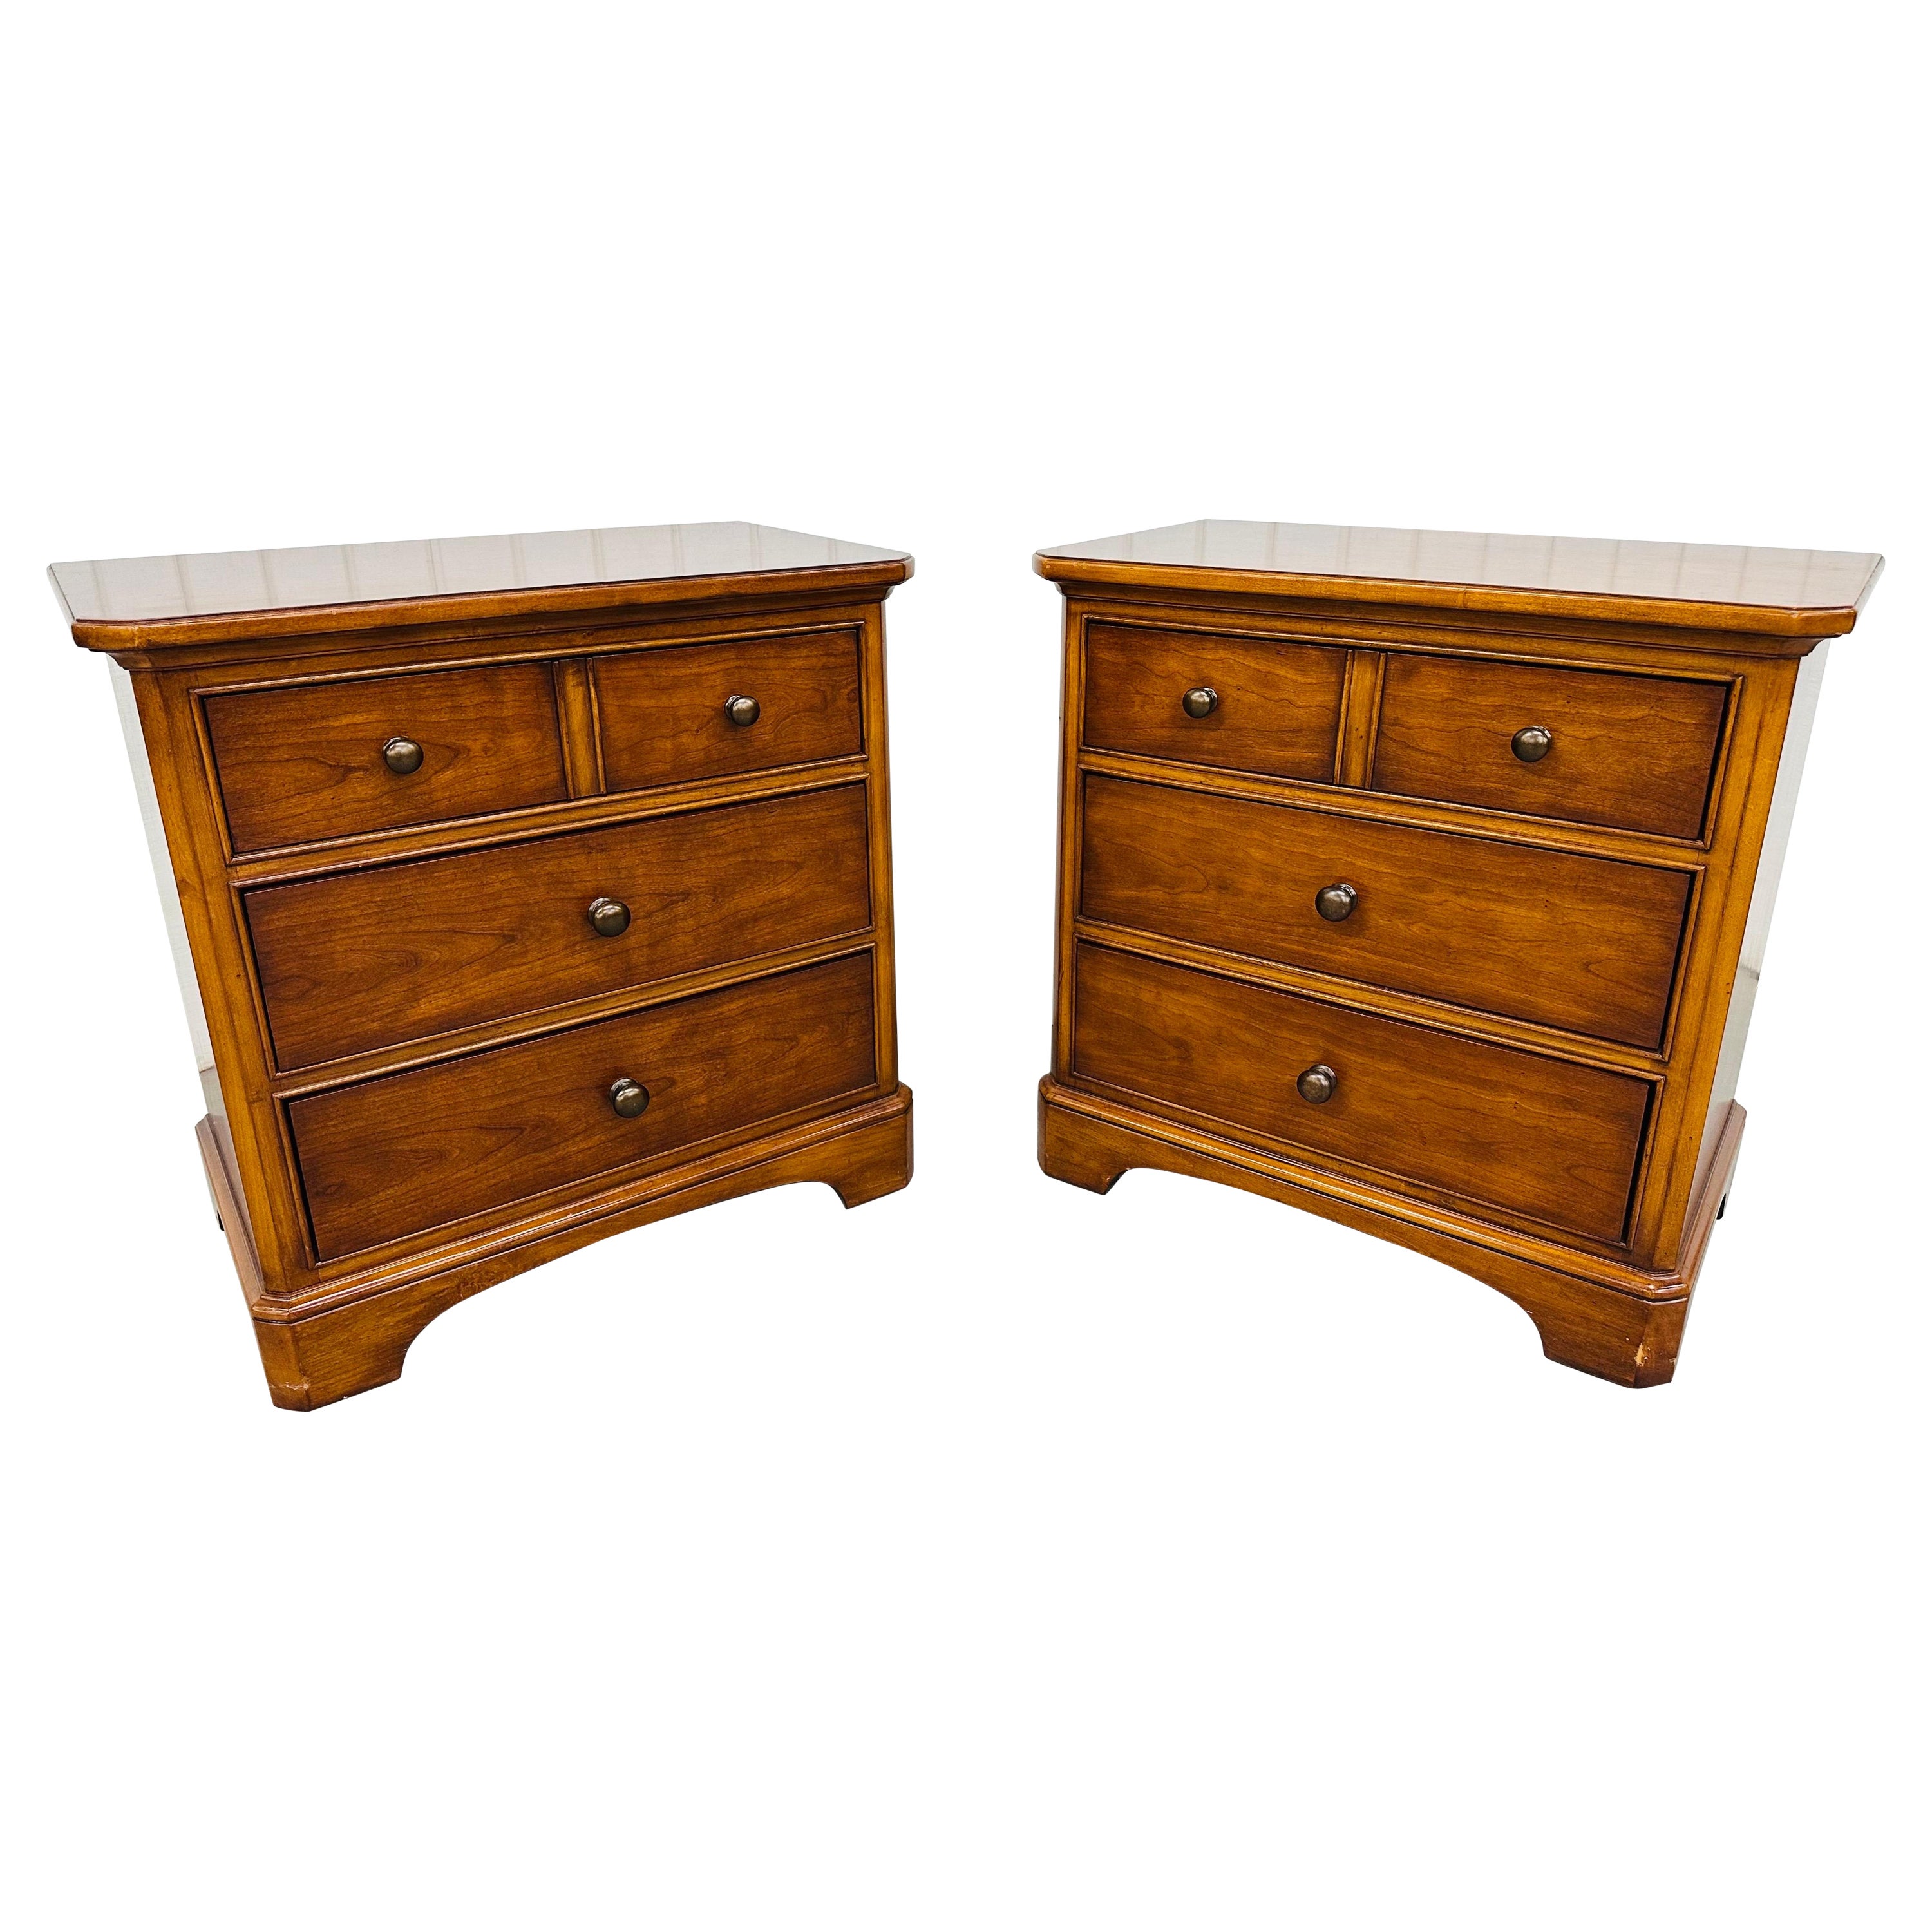 Vintage Thomasville Cherry Bachelor Chest Nightstands - Set of 2 For Sale